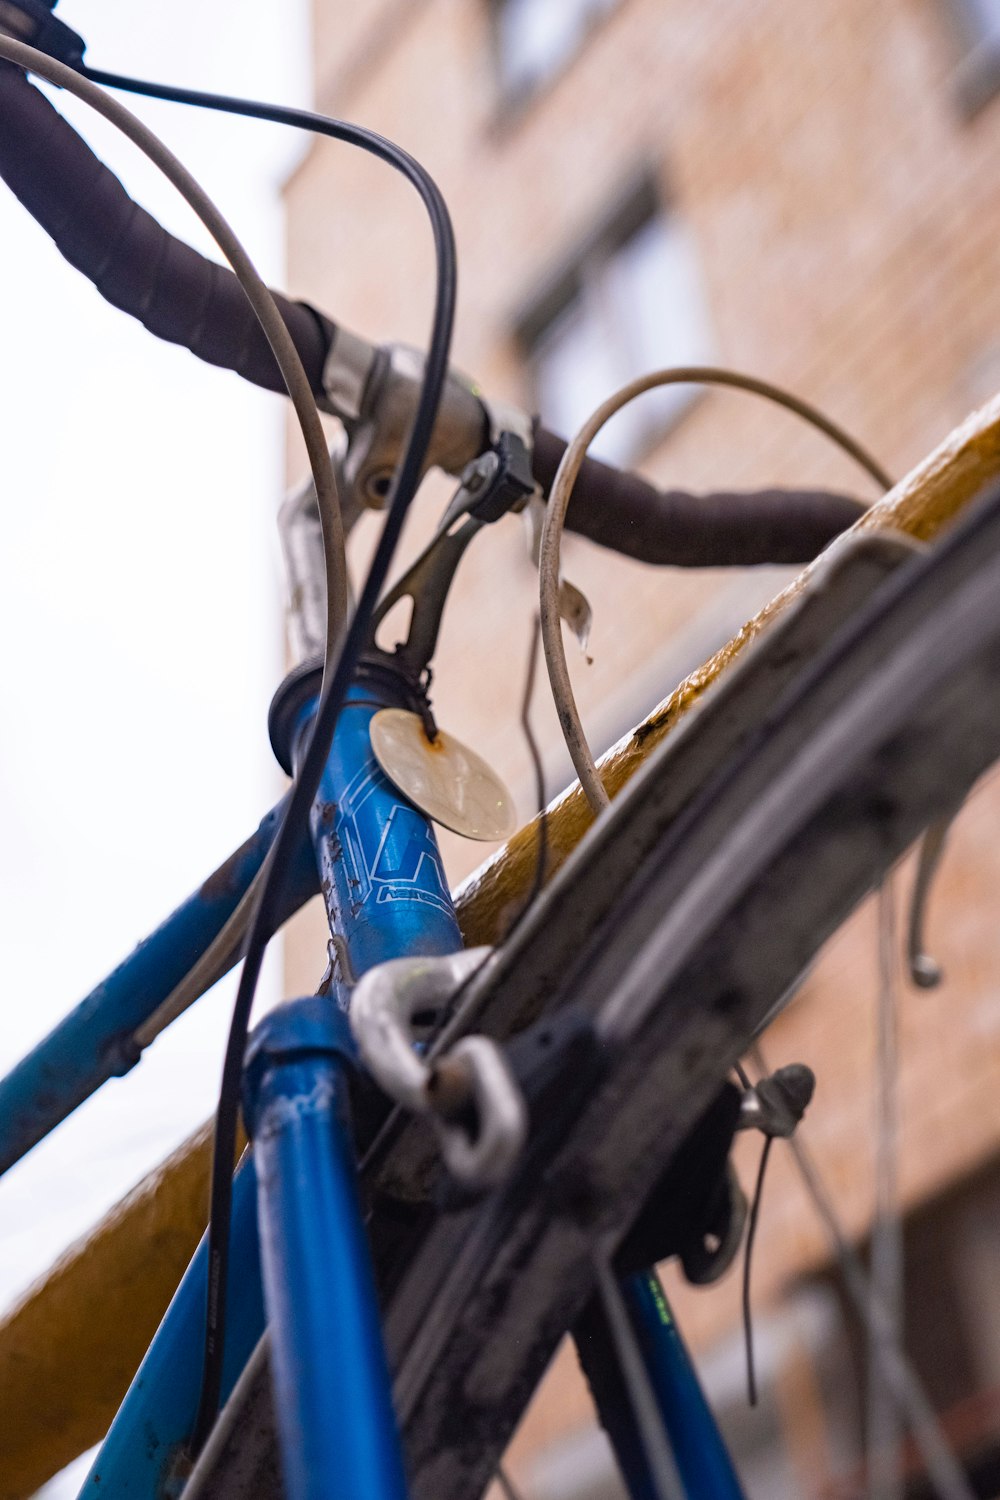 a close up of a bicycle with a building in the background